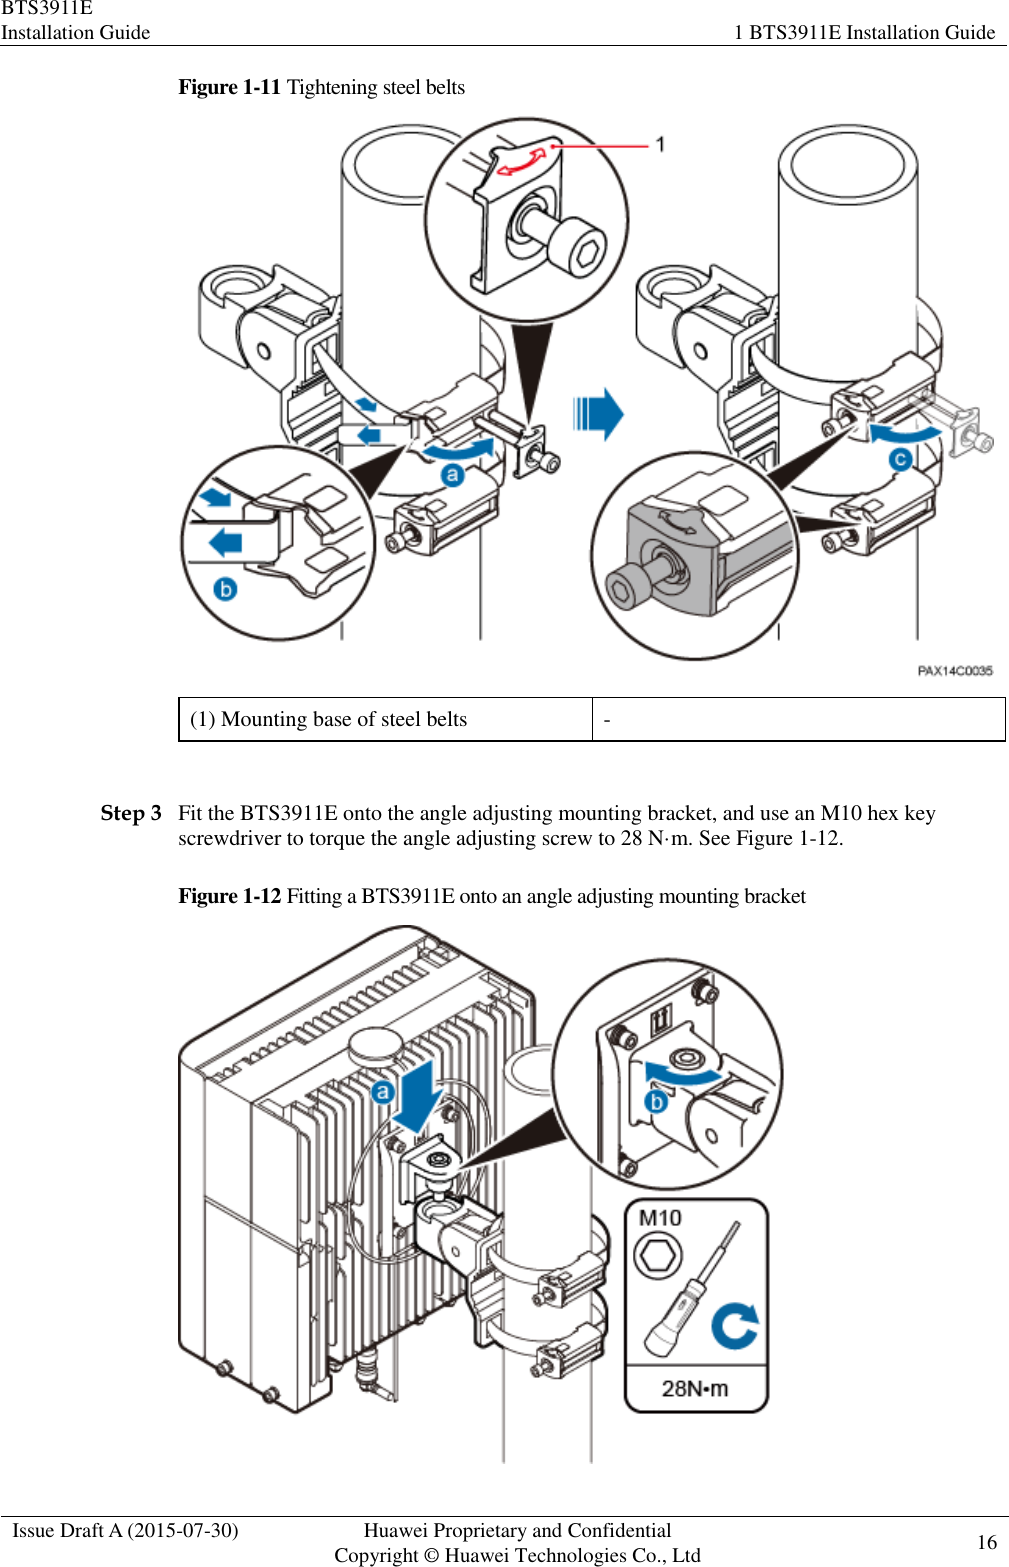 BTS3911E Installation Guide 1 BTS3911E Installation Guide  Issue Draft A (2015-07-30) Huawei Proprietary and Confidential           Copyright © Huawei Technologies Co., Ltd 16    Figure 1-11 Tightening steel belts  (1) Mounting base of steel belts -  Step 3 Fit the BTS3911E onto the angle adjusting mounting bracket, and use an M10 hex key screwdriver to torque the angle adjusting screw to 28 N·m. See Figure 1-12. Figure 1-12 Fitting a BTS3911E onto an angle adjusting mounting bracket  